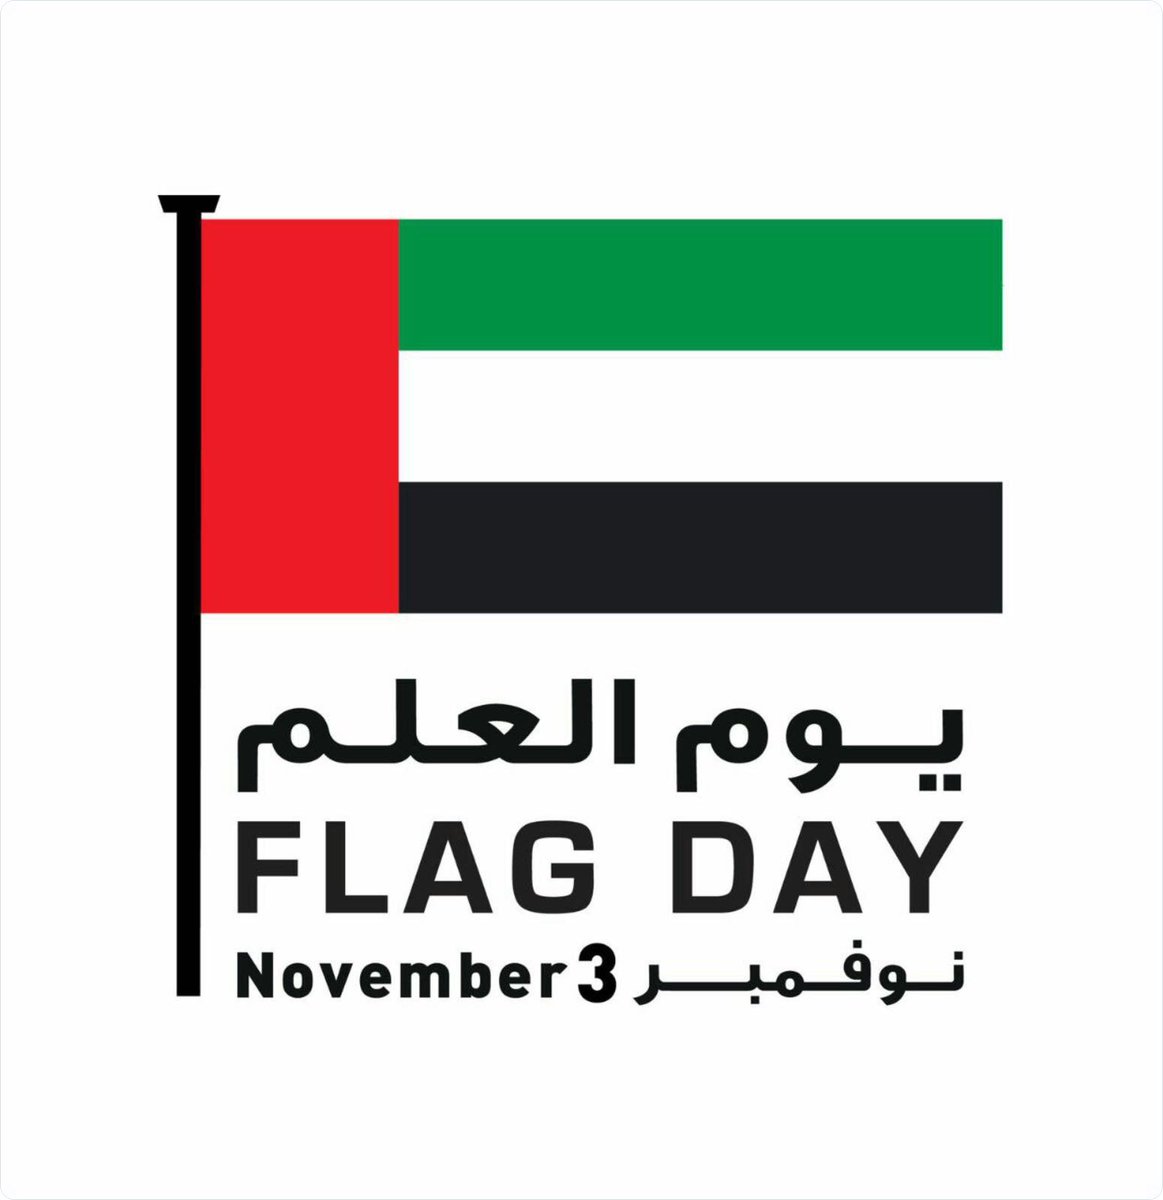 The "Flag Day"                 